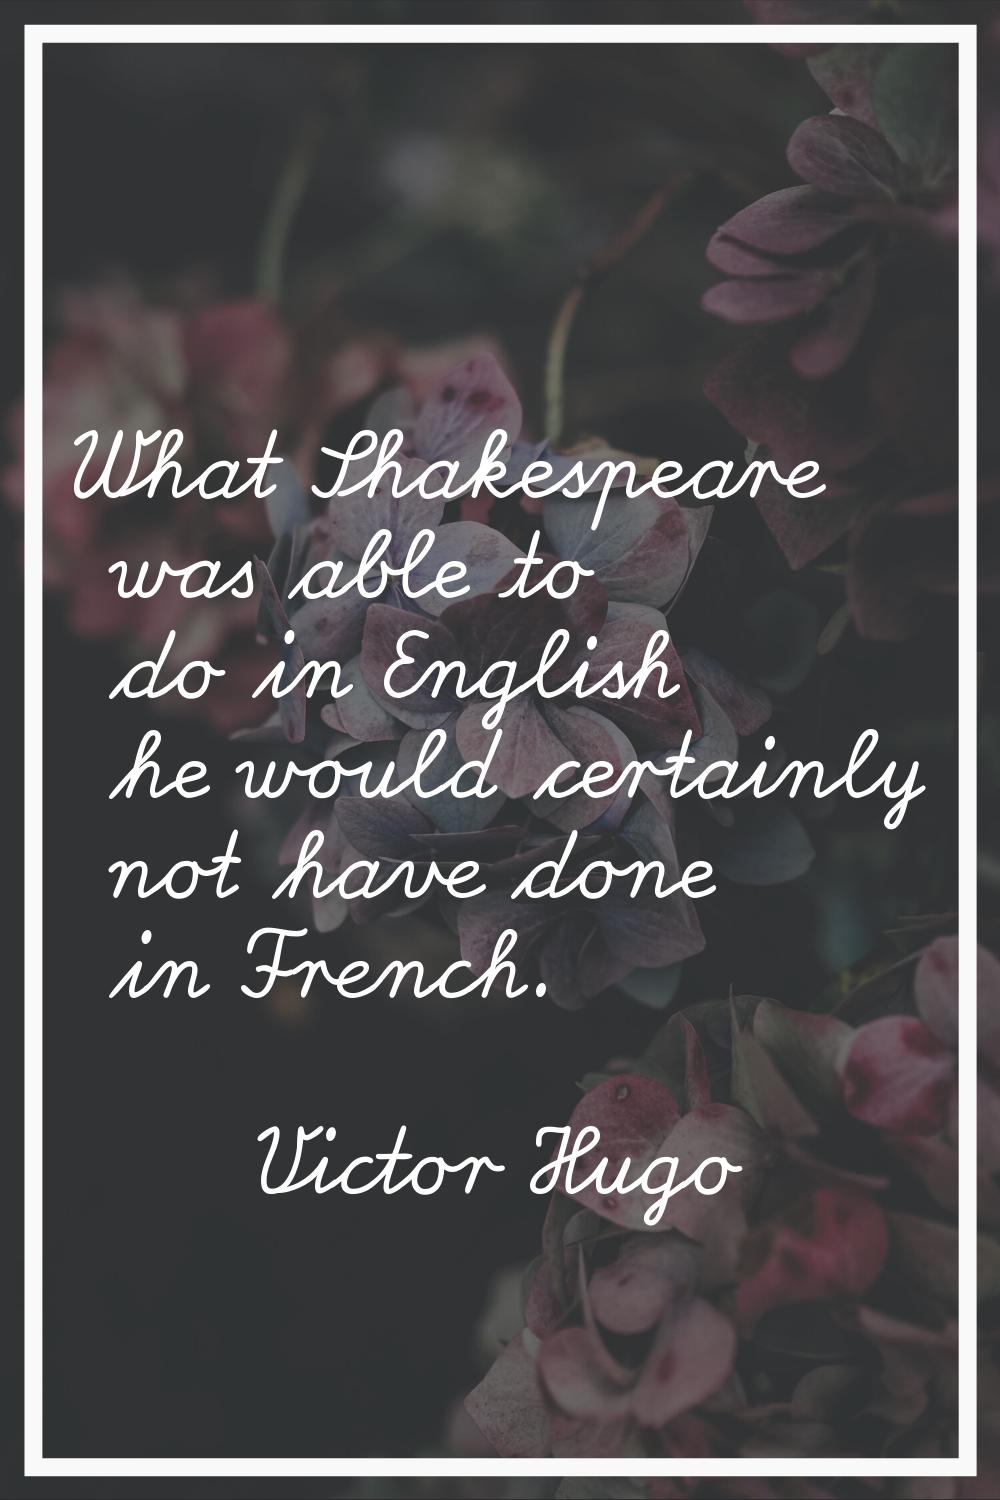 What Shakespeare was able to do in English he would certainly not have done in French.